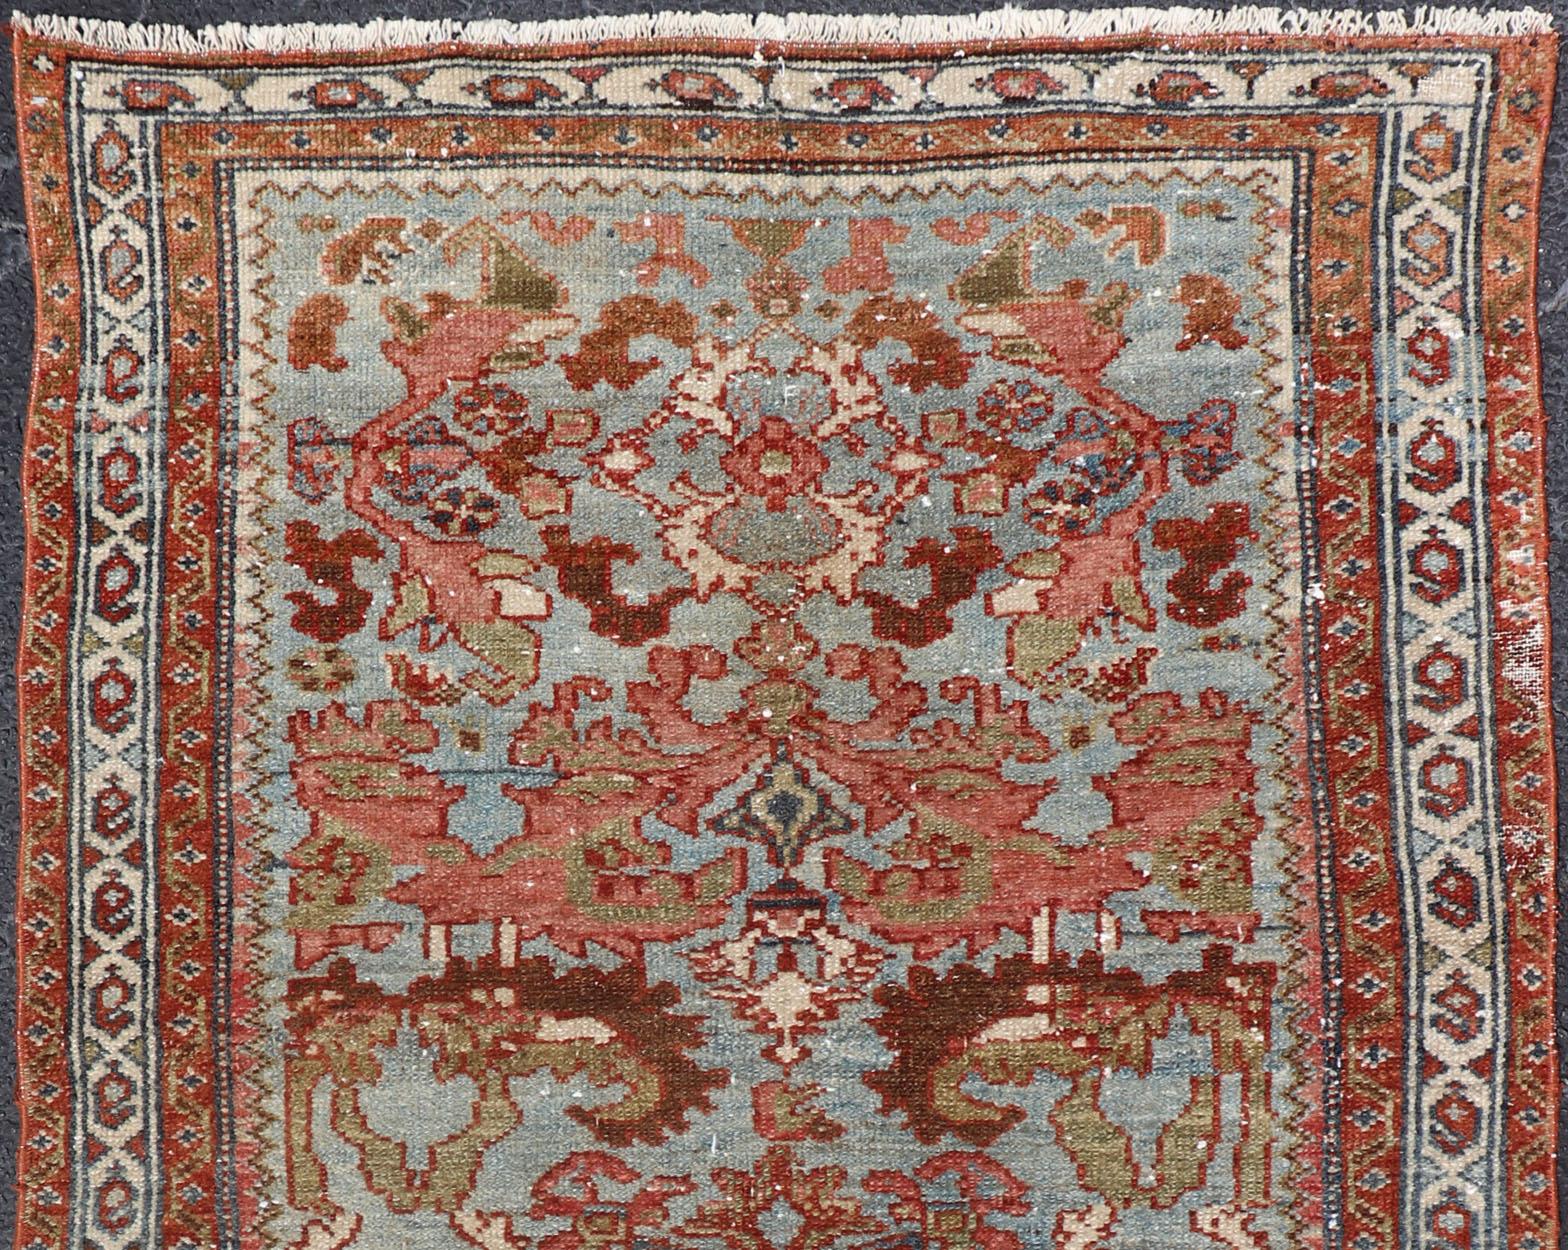 Hand-Knotted Antique Persian Malayer Rug with a Blue Field and Stylized Floral Design